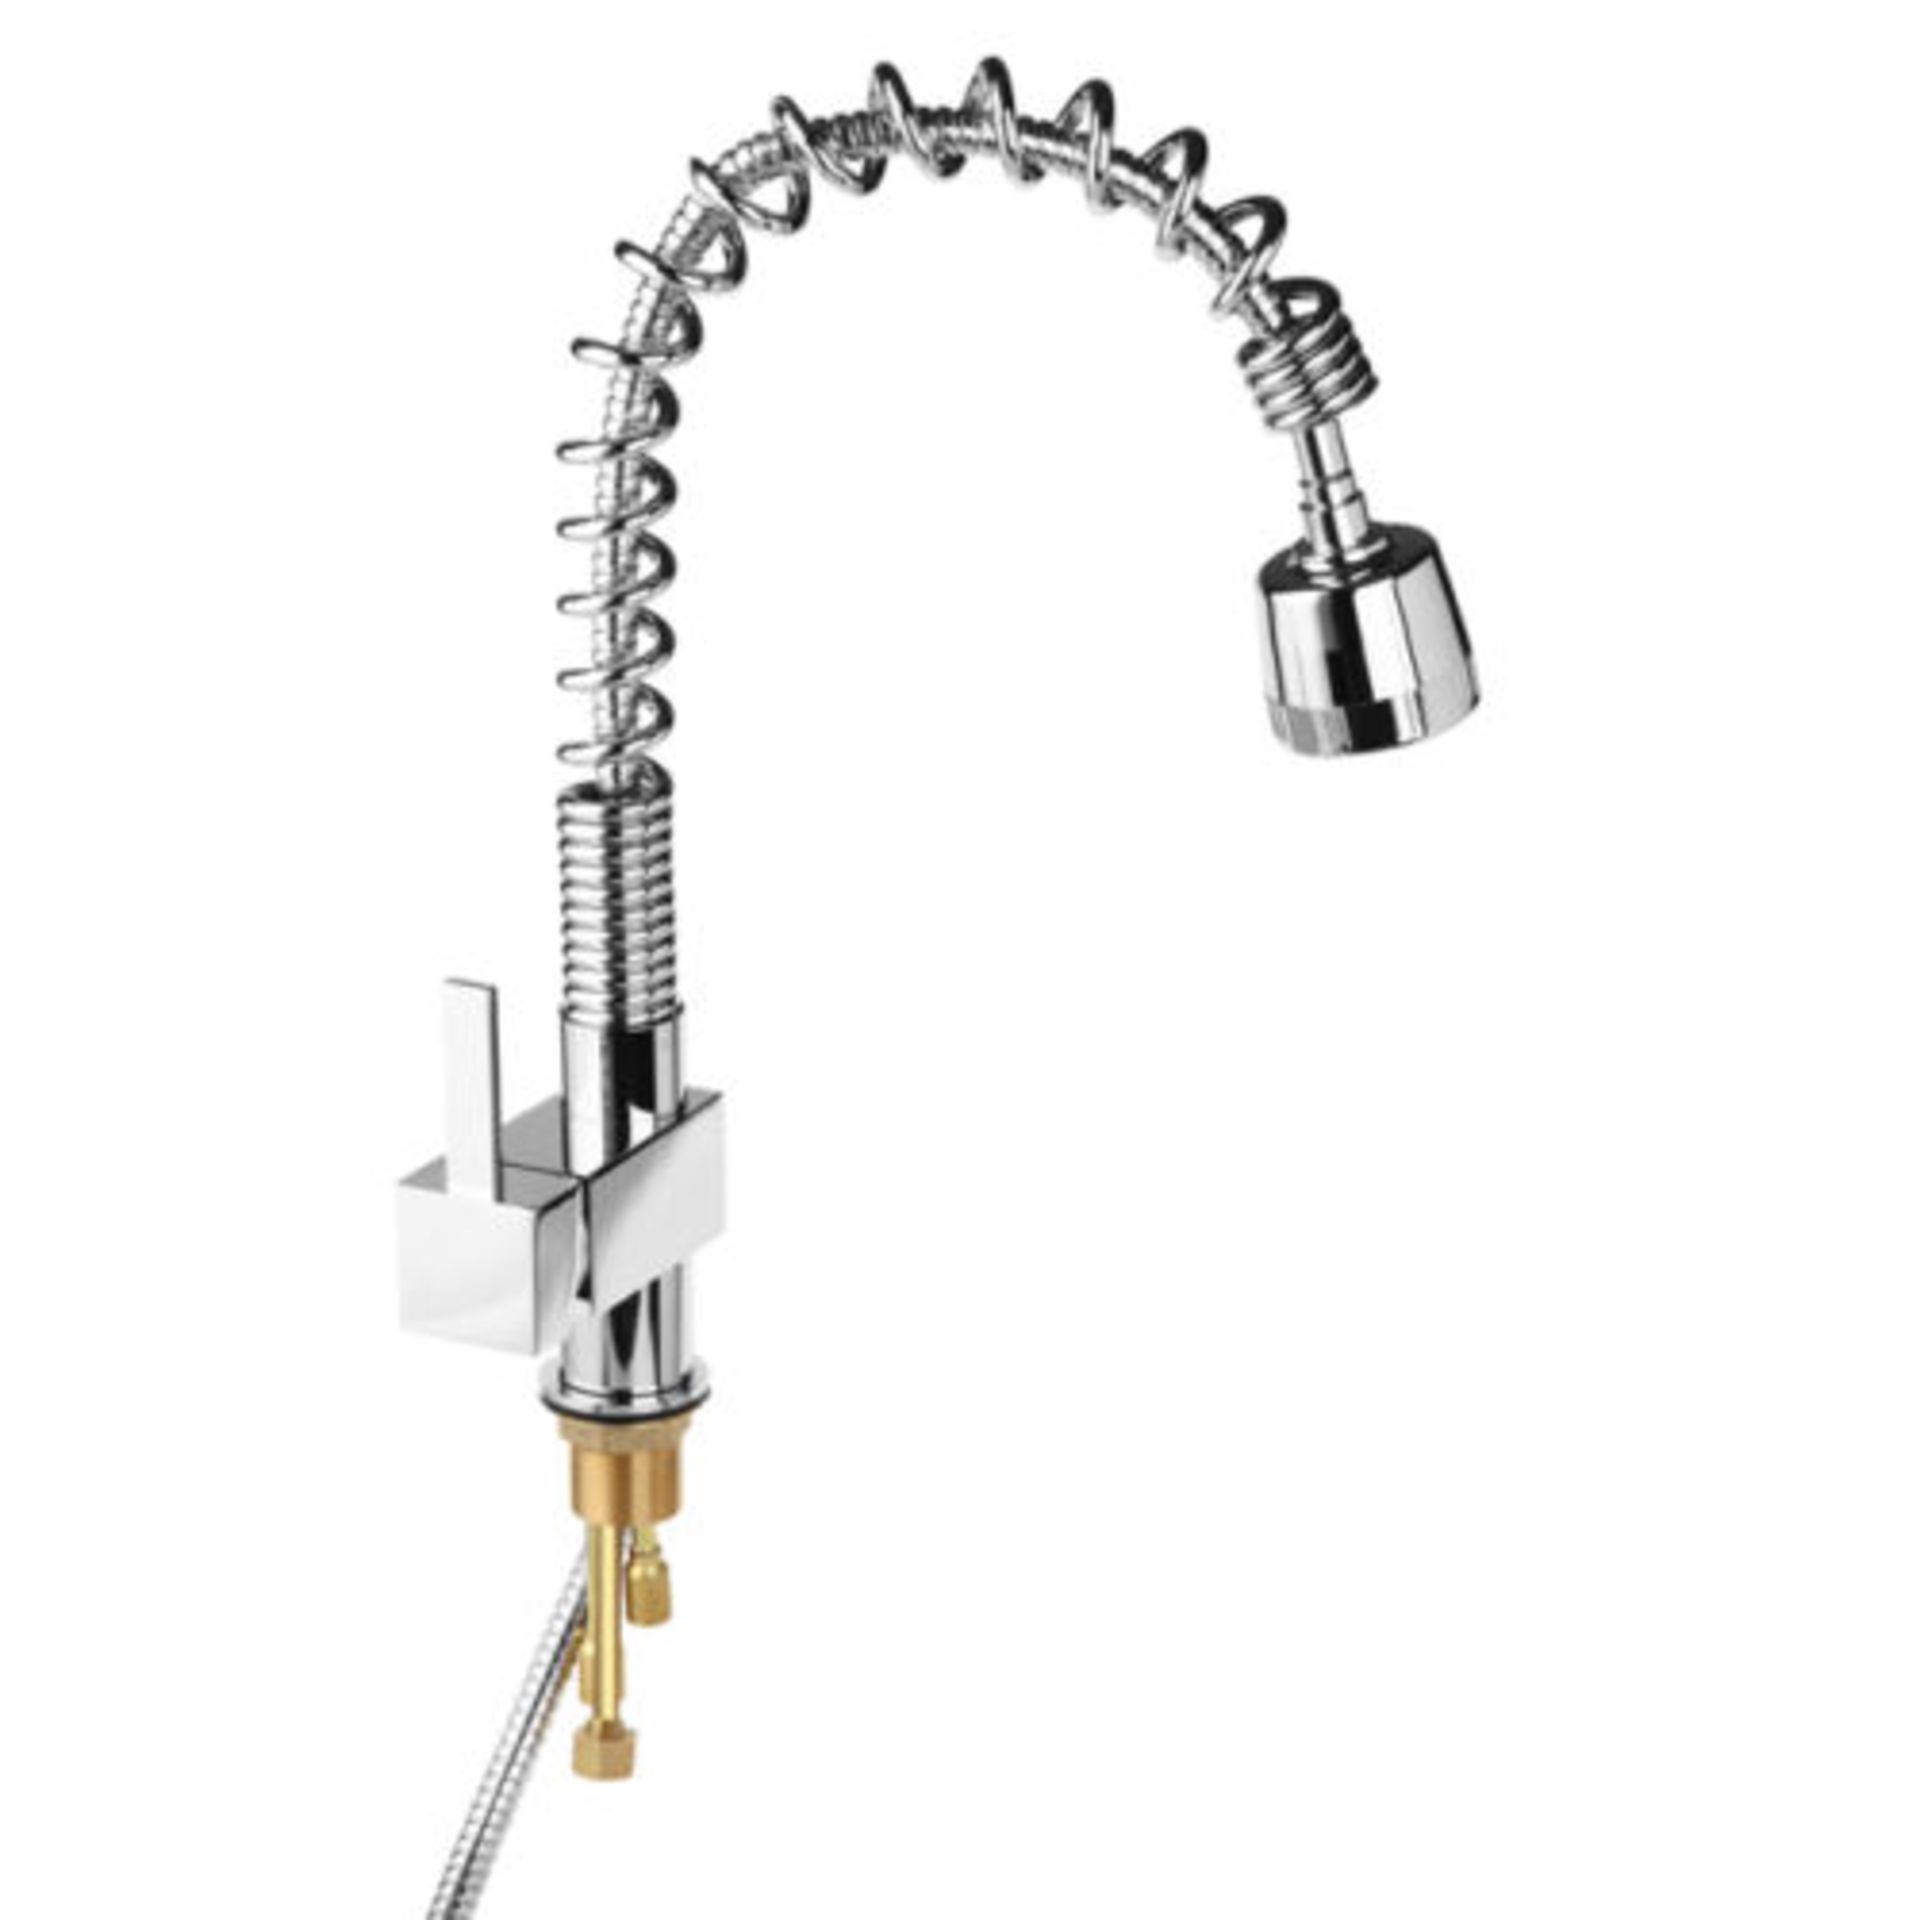 Brand New Maddie Brushed Chrome Monobloc Kitchen Tap Swivel Pull Out Spray Mixer. RRP £219.99. Mater - Image 2 of 2